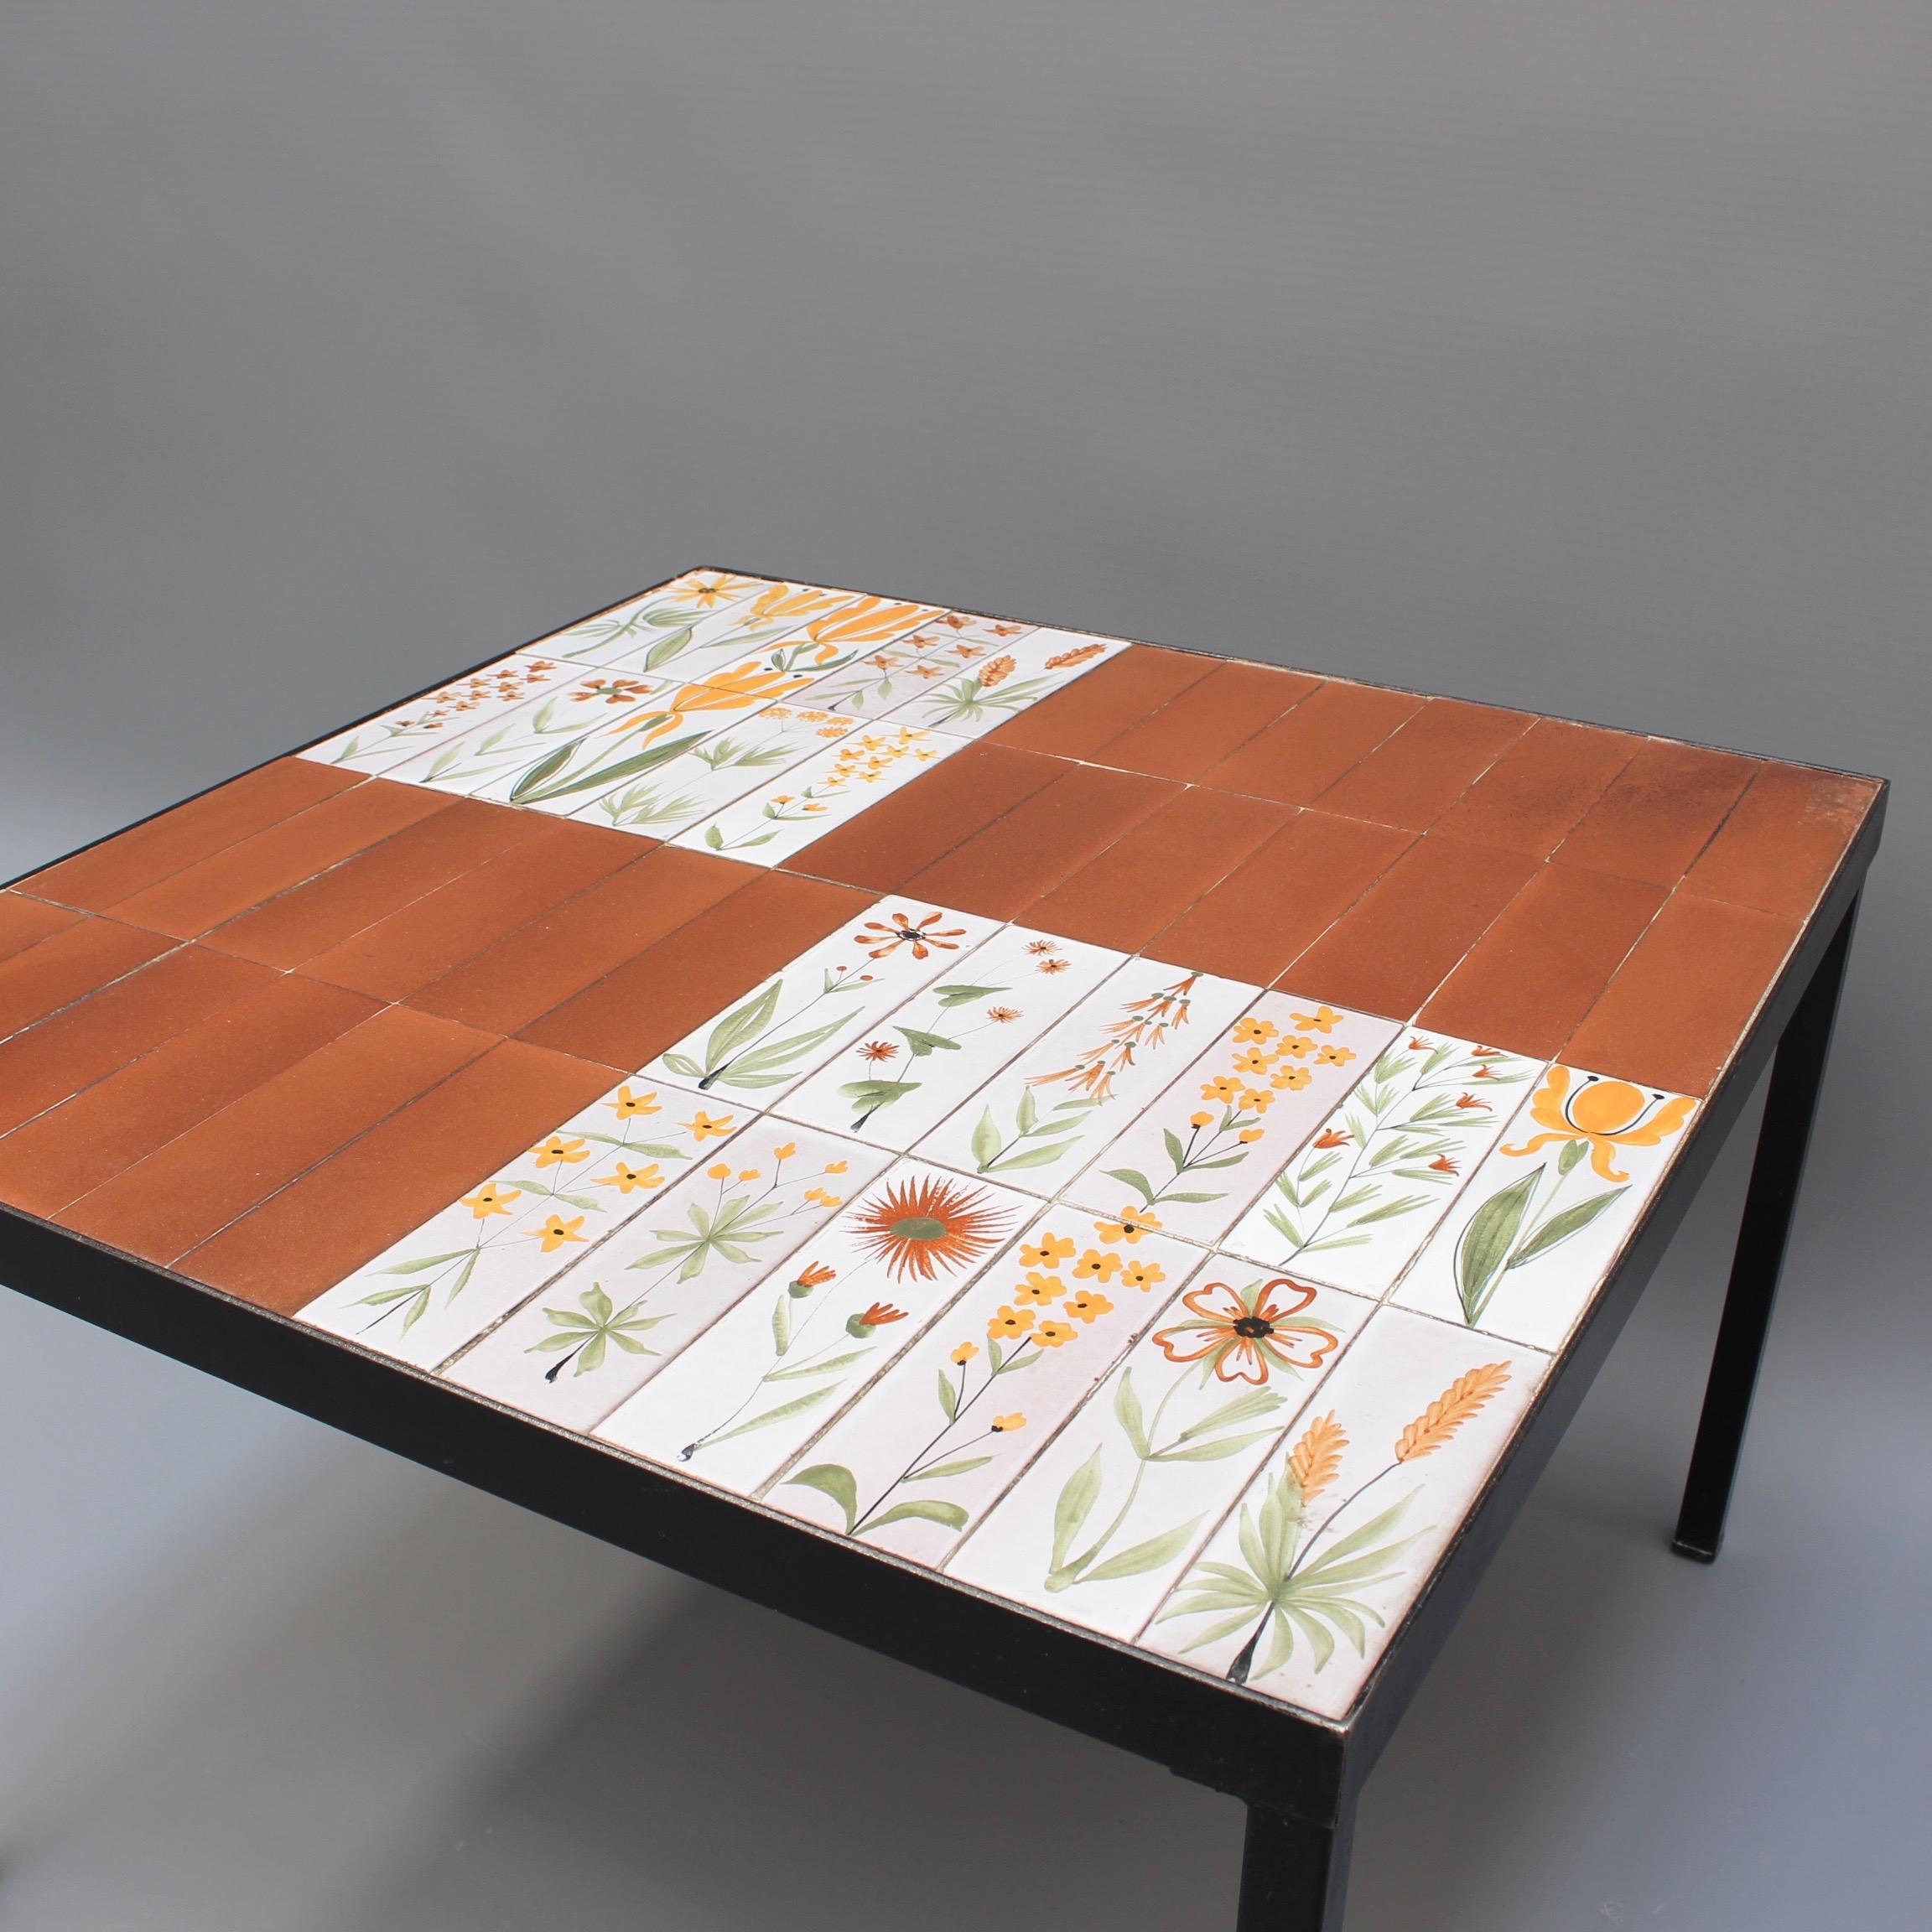 Metal Coffee Table with Decorative Ceramic Tiles by Roger Capron, circa 1970s For Sale